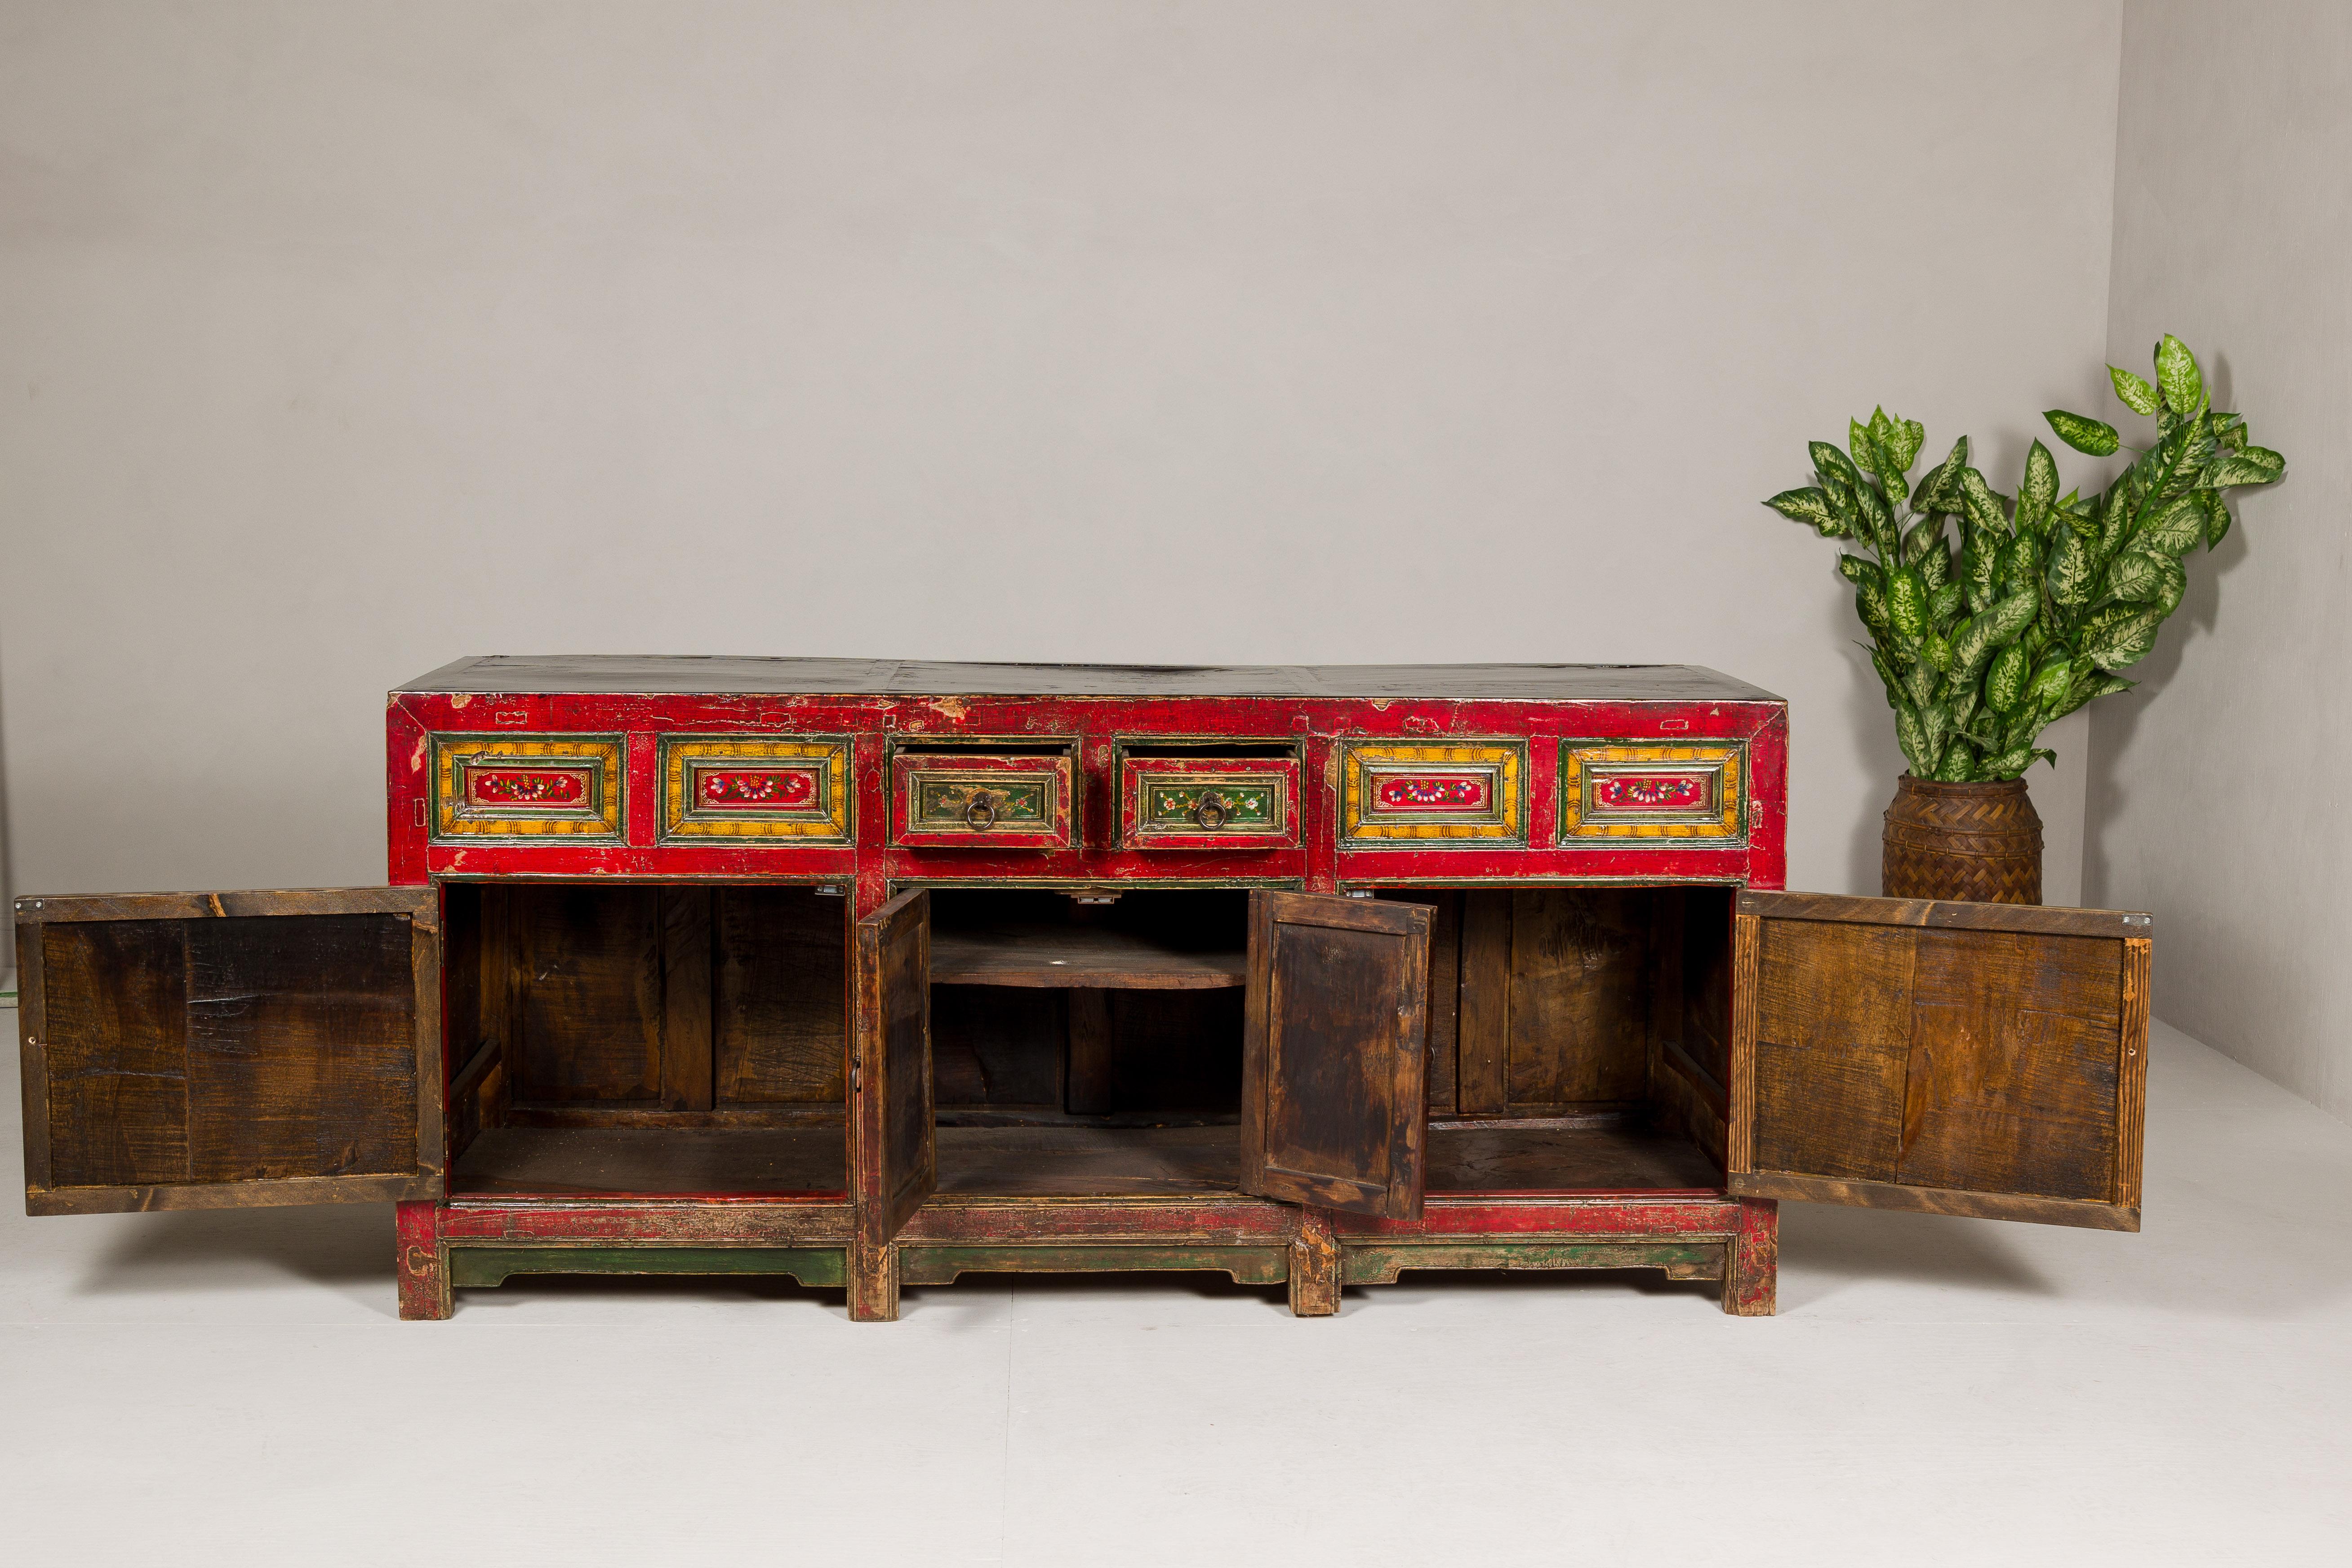 19th Century Mongolian Polychrome Sideboard with Doors, Drawers and Floral Décor For Sale 6